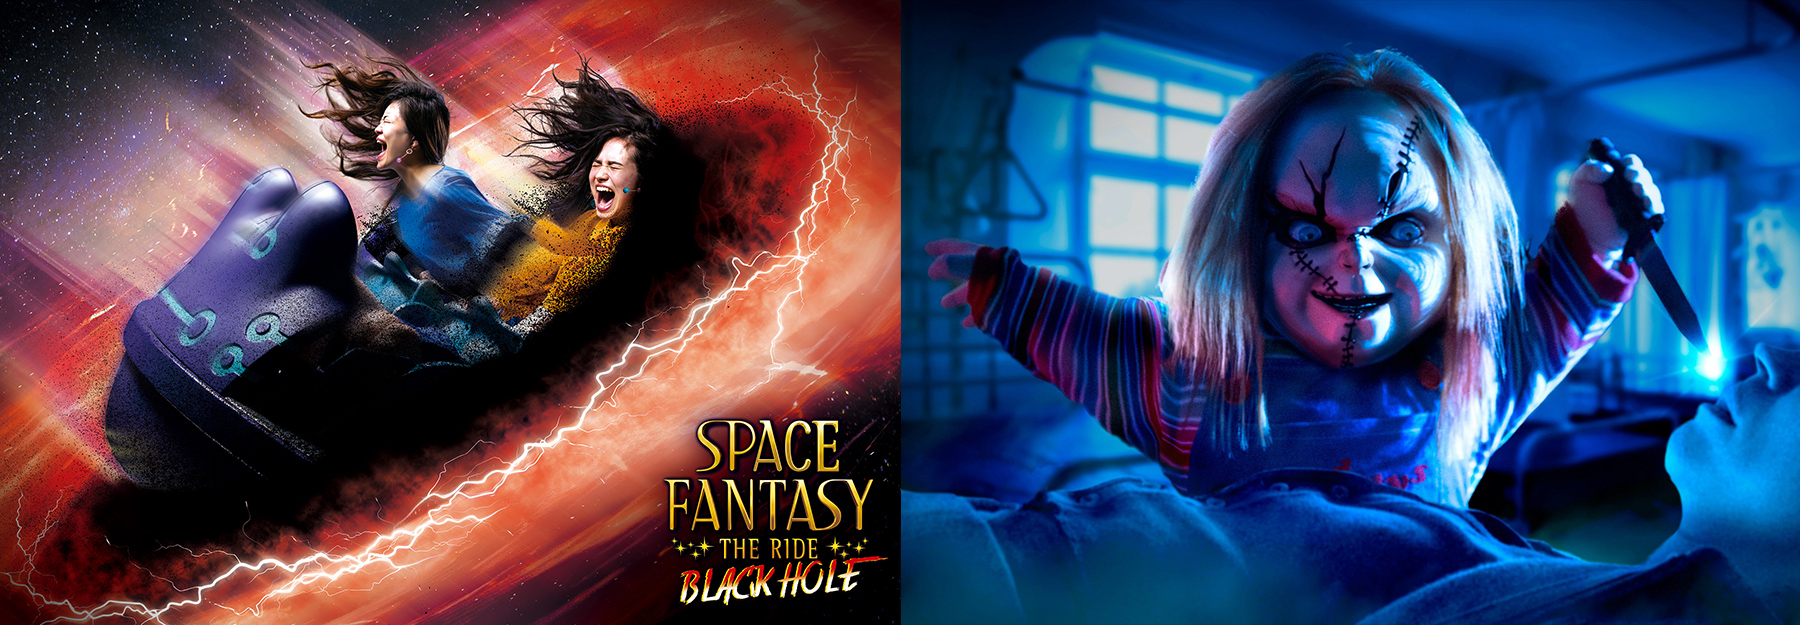 Universal Studios Japan Halloween Horror Nights 2019 event guide - Space Fantasy The Ride BLACK HOLE and CULT OF CHUCKY horror maze